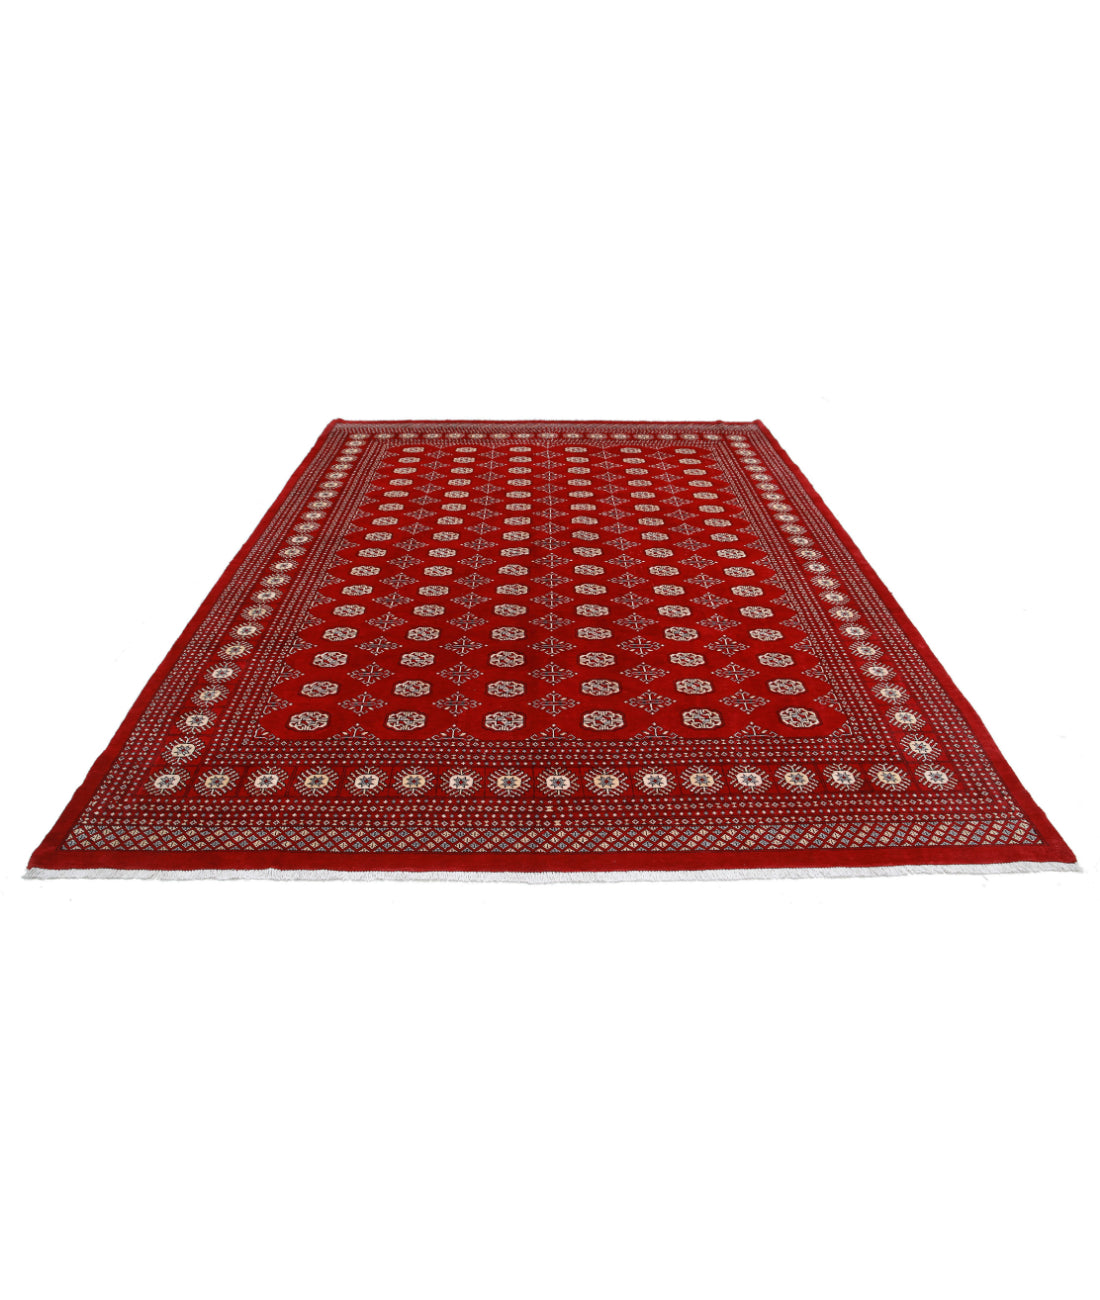 Hand Knotted Tribal Bokhara Wool Rug - 8'2'' x 10'7'' 8'2'' x 10'7'' (245 X 318) / Red / Ivory